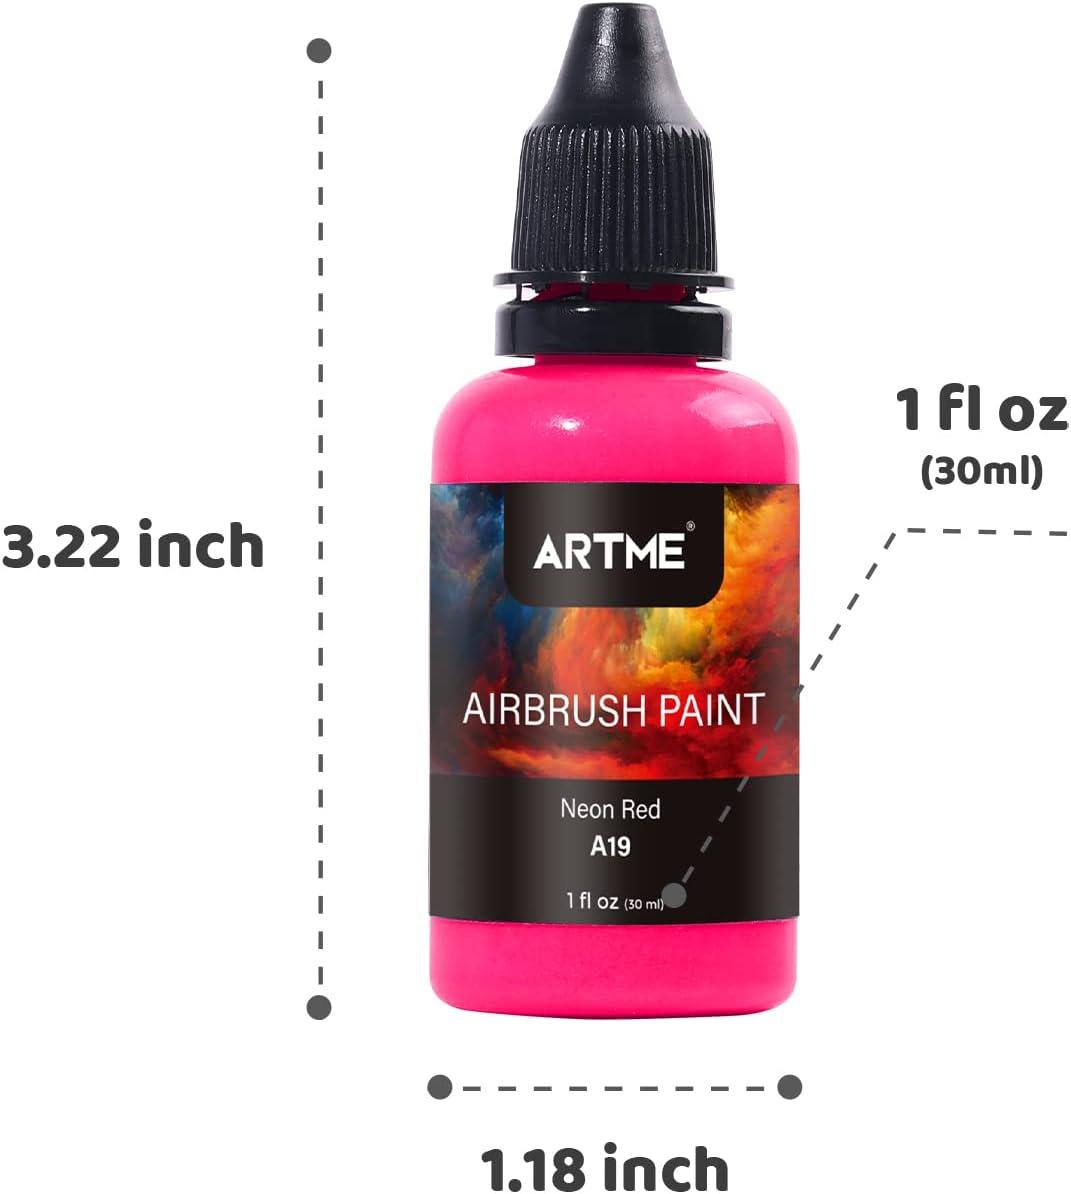 Hot Pink, Opaque Acrylic Airbrush Paint, 8 oz., Hot Pink - 8 oz